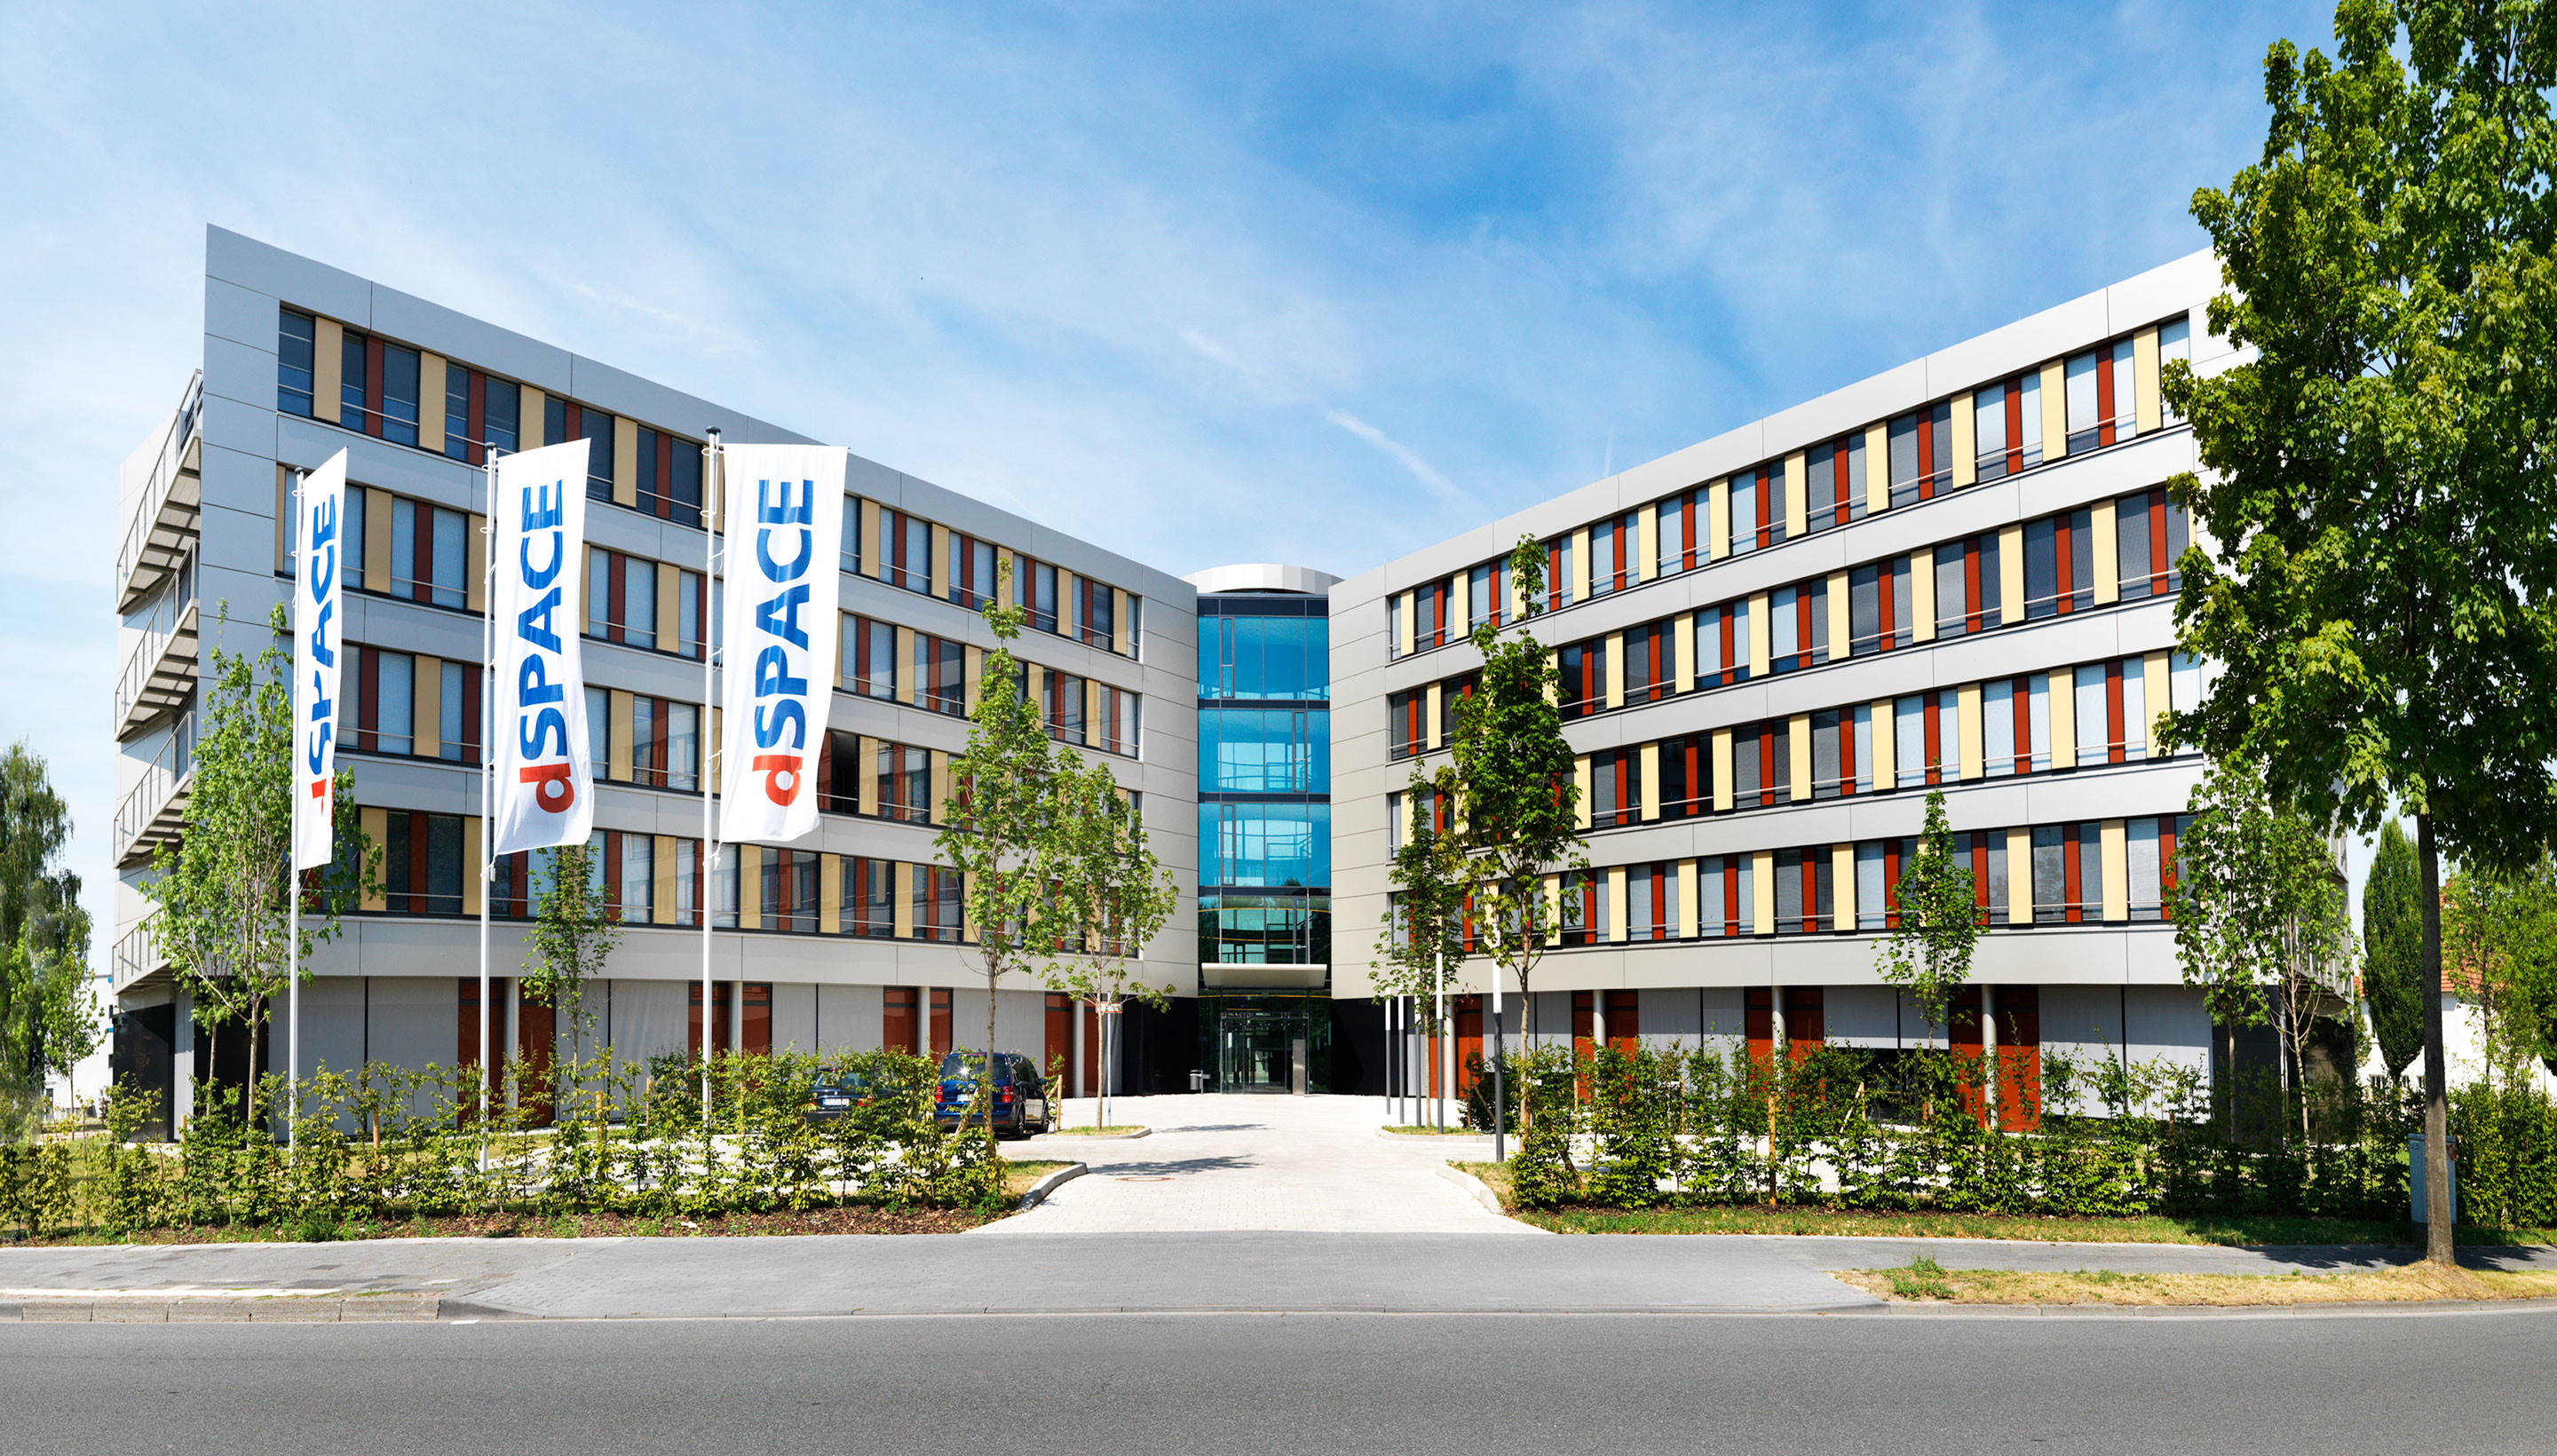 Modern headquarters of dSpace in Paderborn, Germany, showcasing a distinctive architectural design that reflects the company's innovation in simulation and validation solutions for the automotive industry.